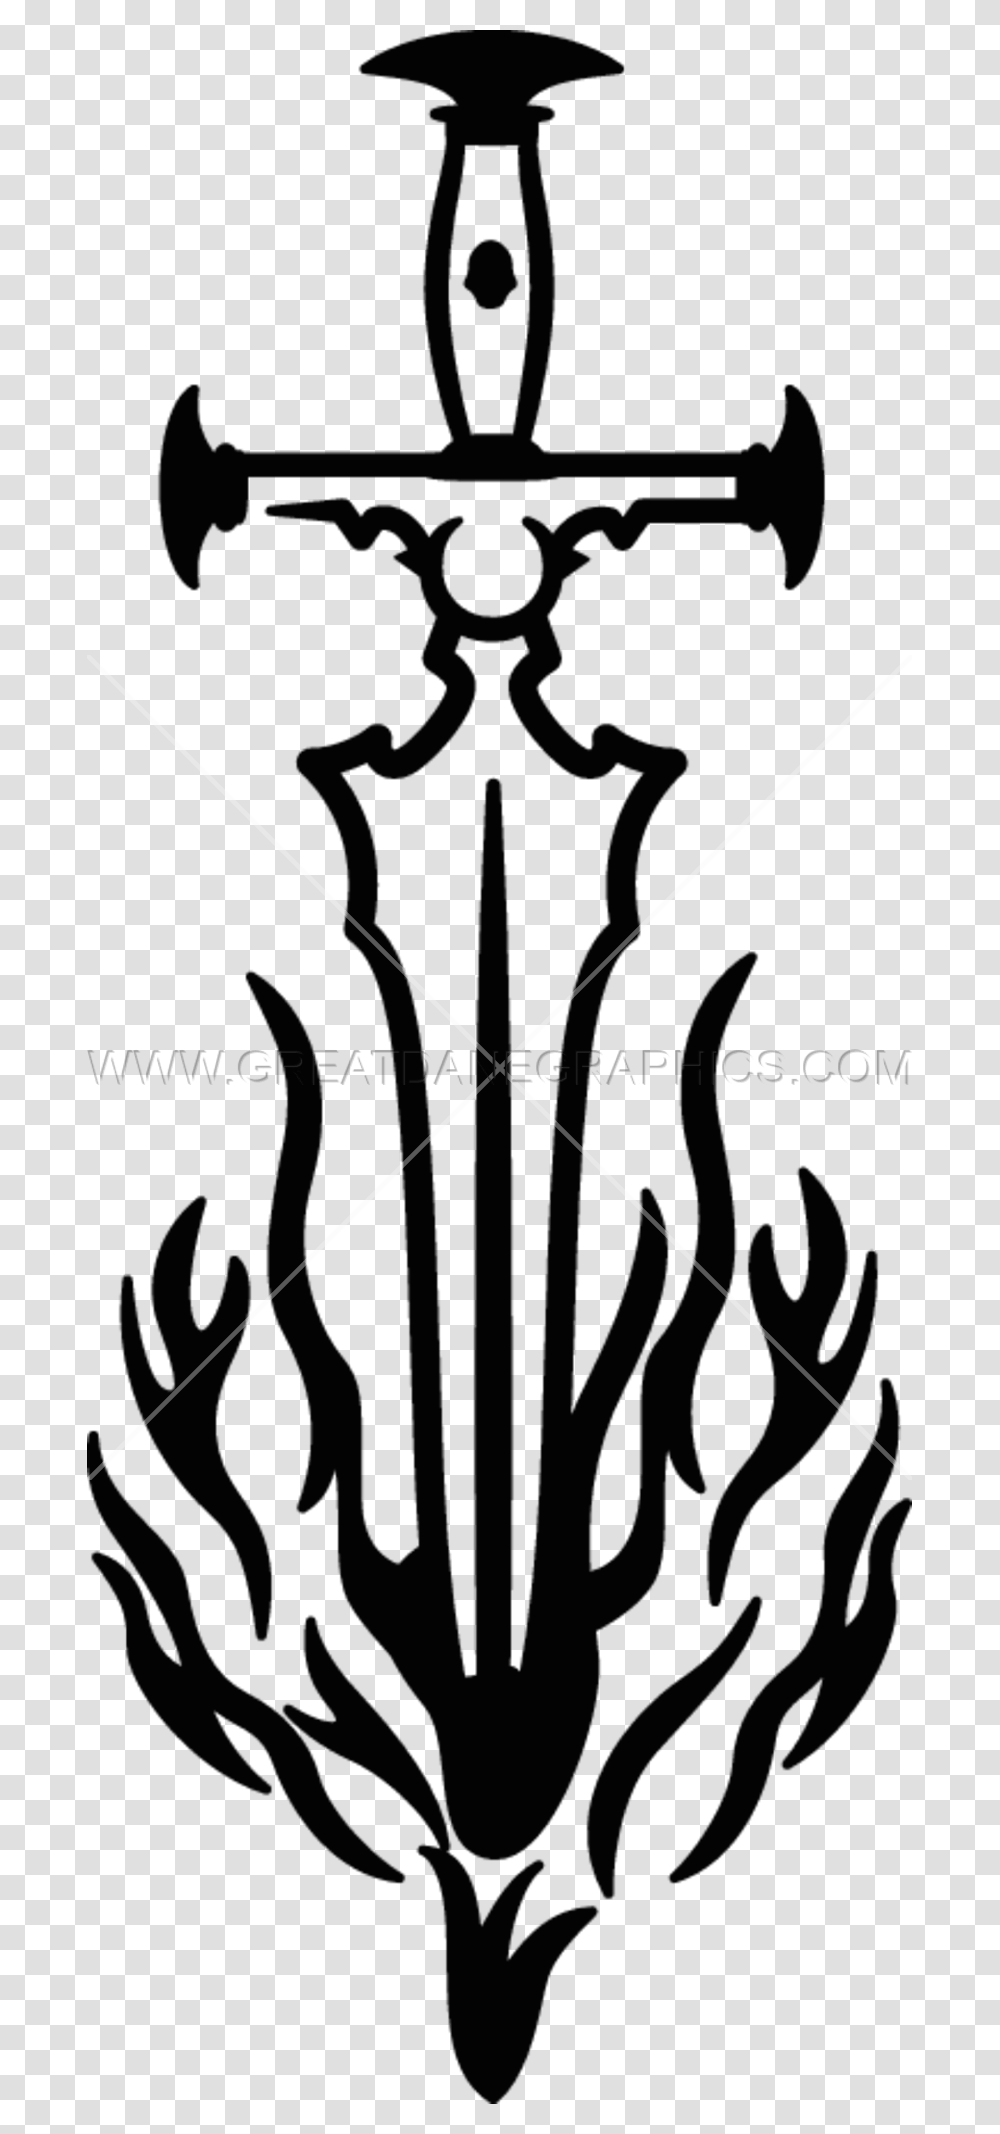 Fire Sword Black And White, Plant, Cross Transparent Png